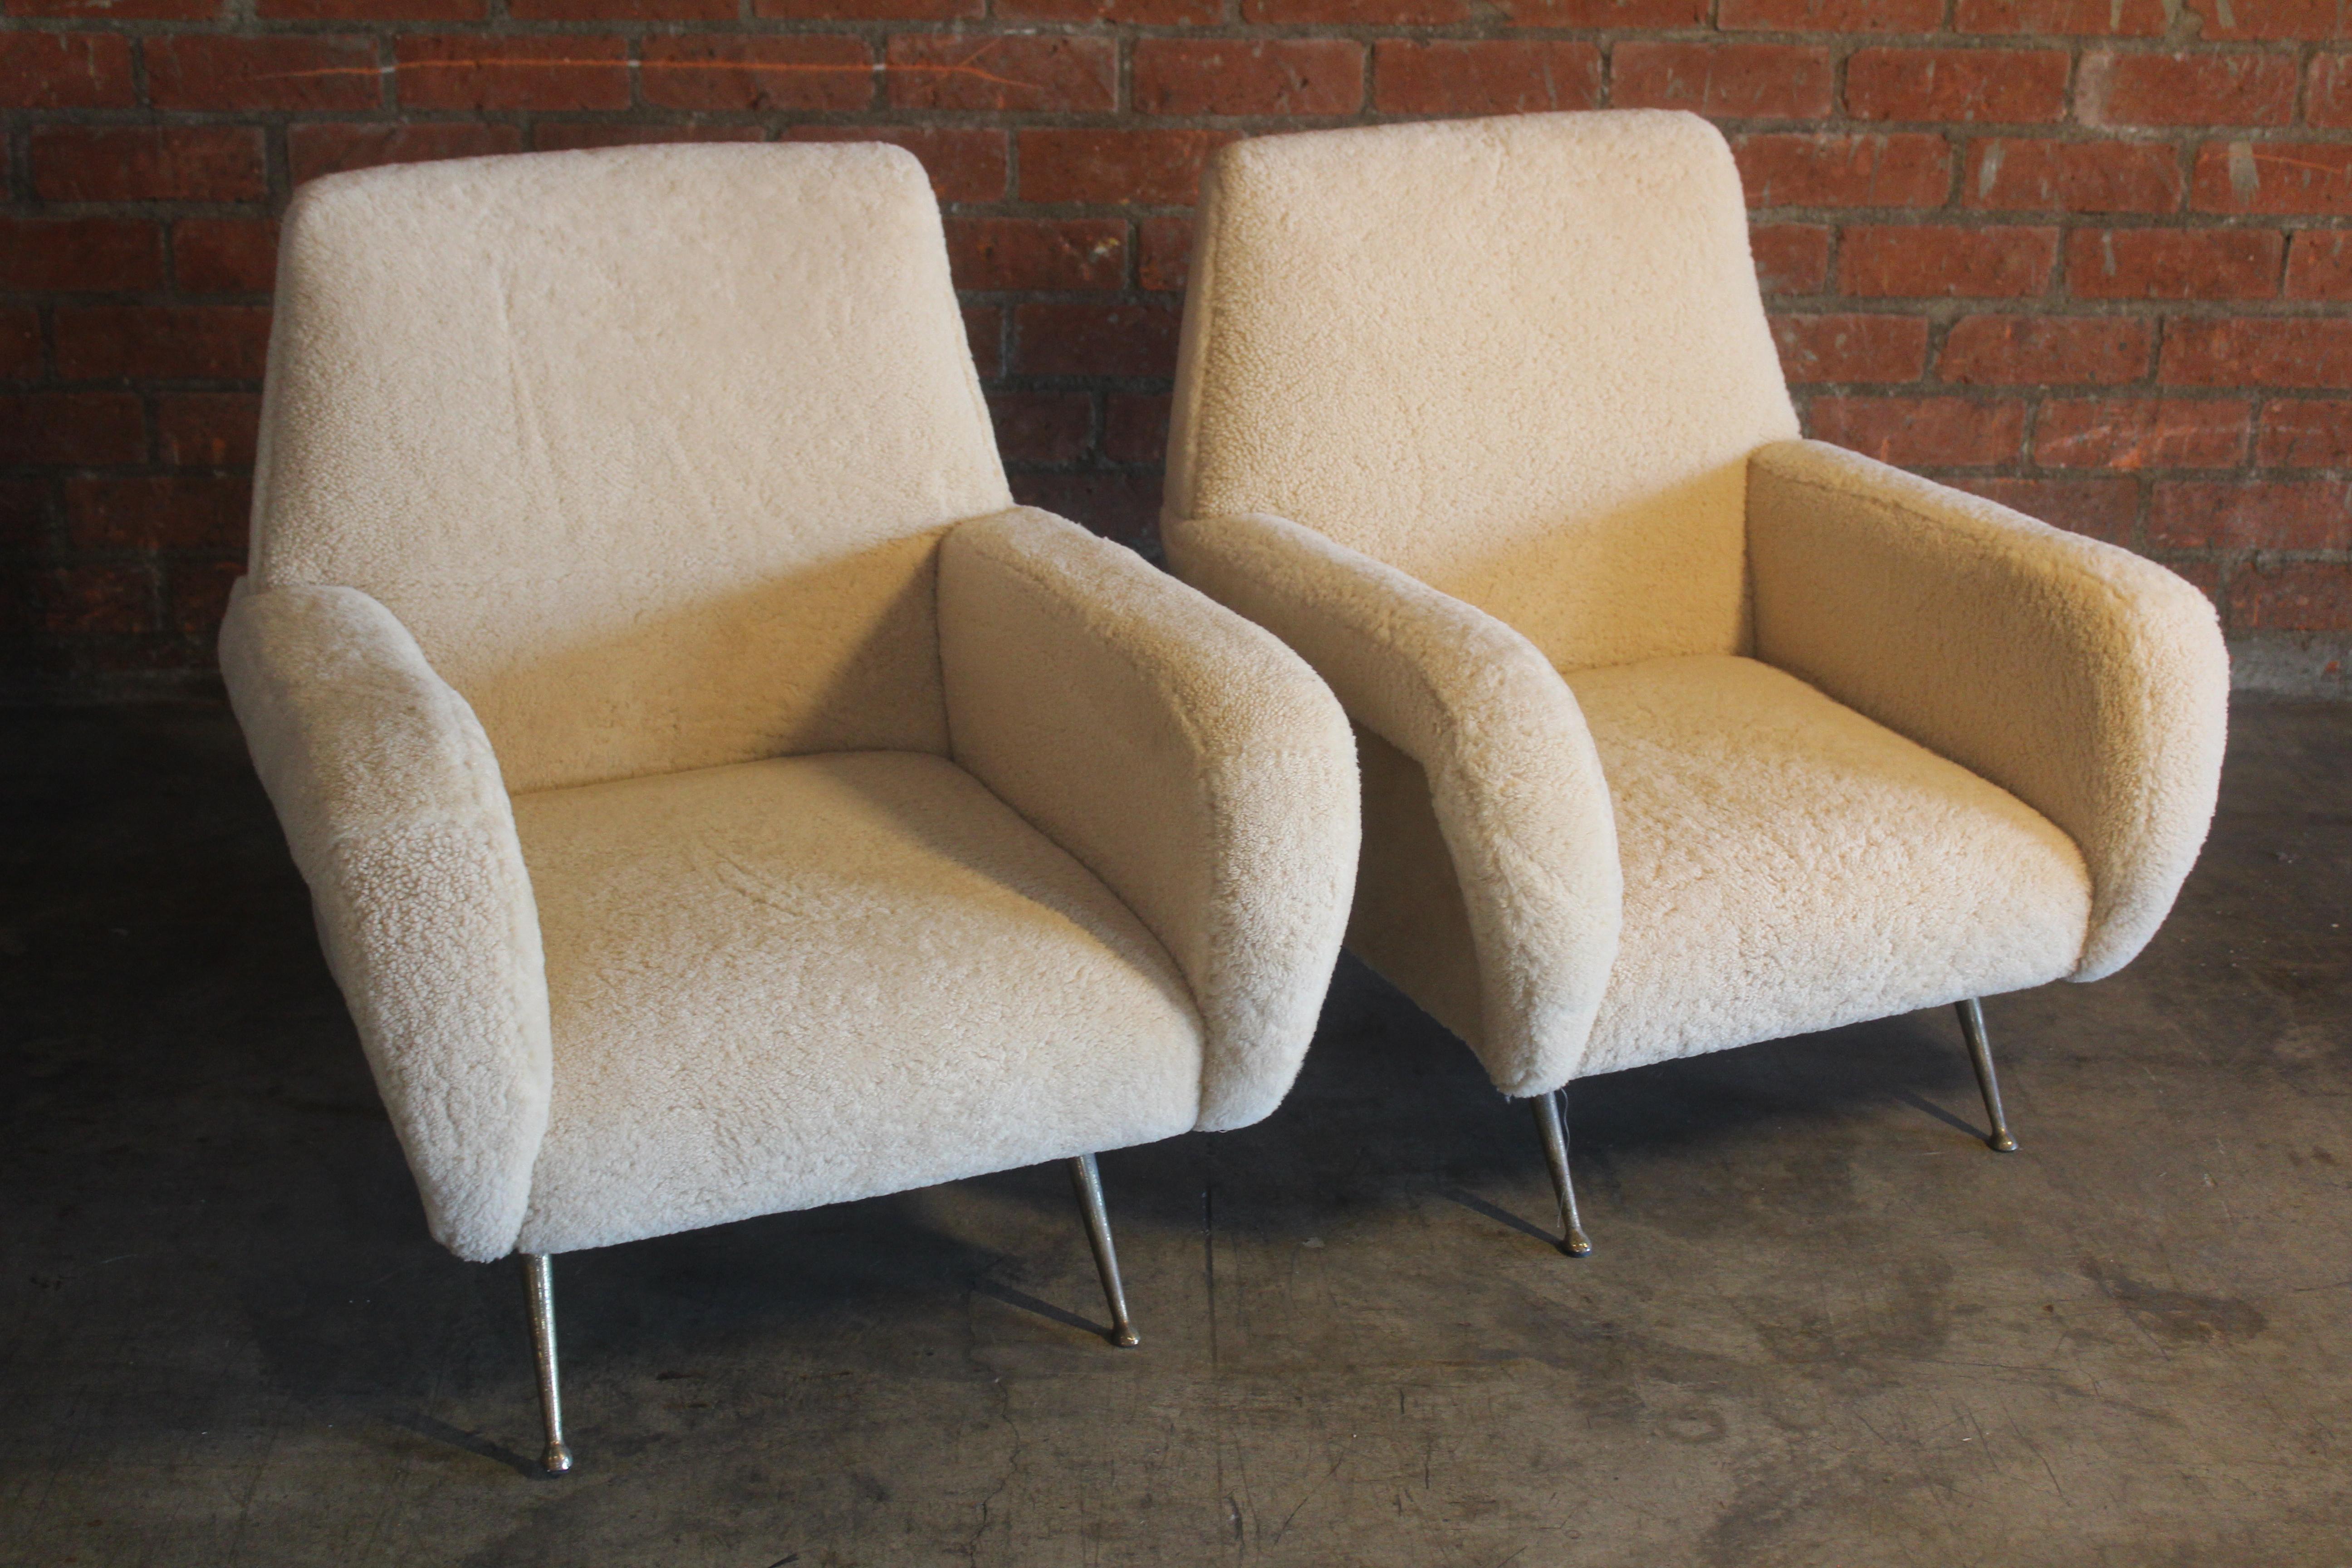 Pair of mid-century Italian armchairs with new sheepskin upholstery. They sit on brass legs. In overall excellent condition. The brass legs show patina. Sold as a pair. Armheight is 22